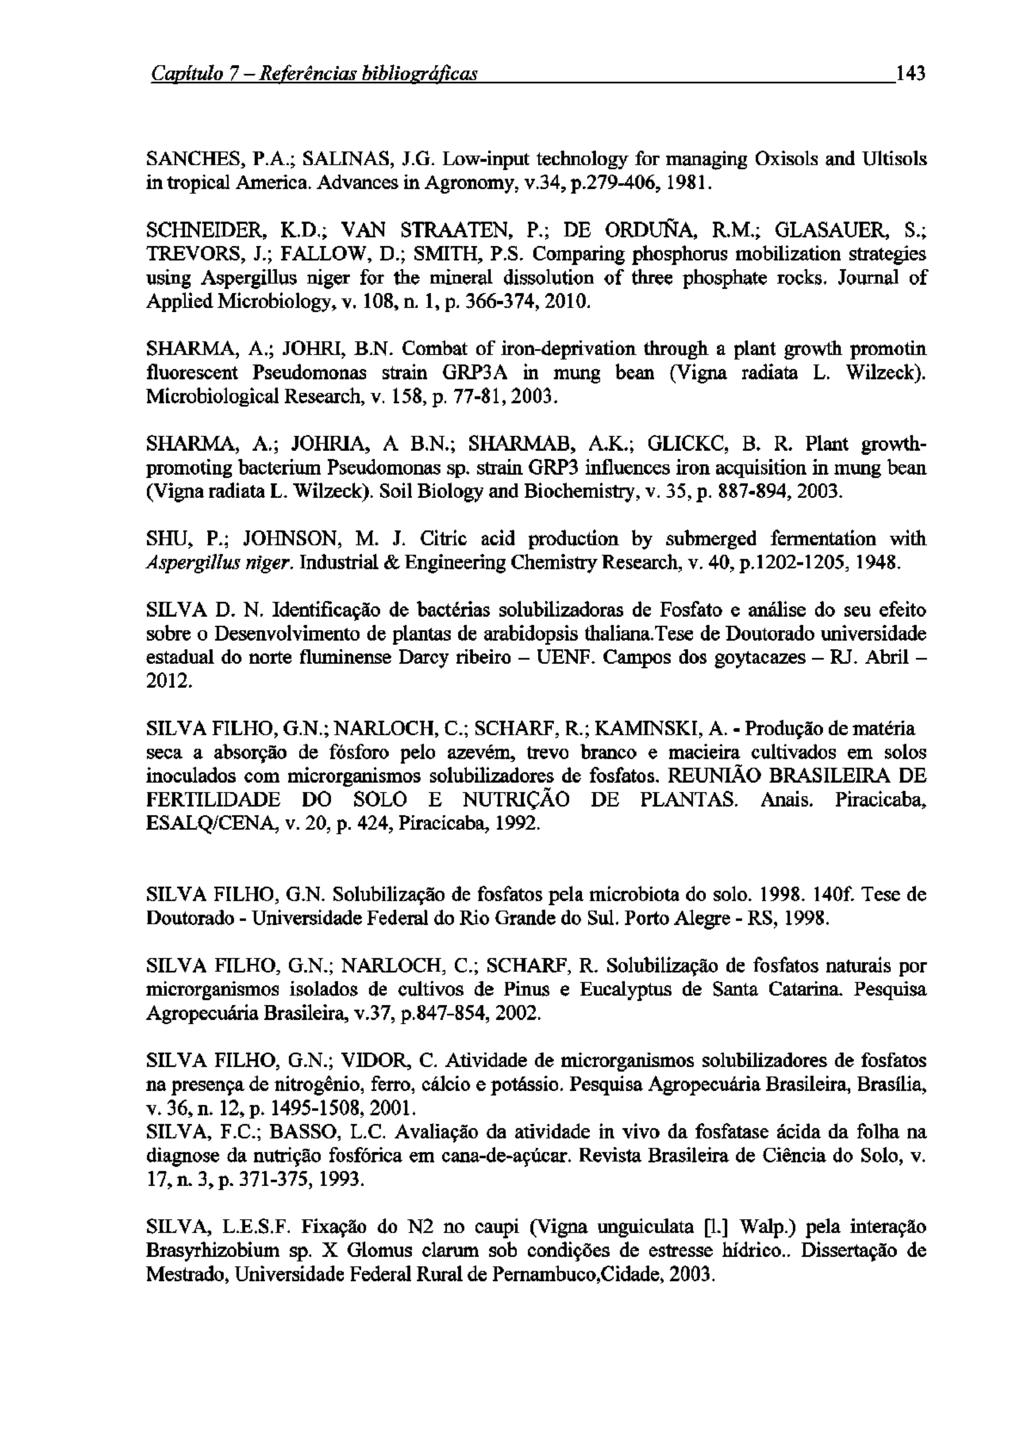 Canítião 7 Referências hibliozráficas 143 SANCHES, P.A.; SALINAS, J.G. Low-input technology for managing Oxisols and Ultisols in tropical America. Advances in Agronomy, v.34, p.279-406, 1981.